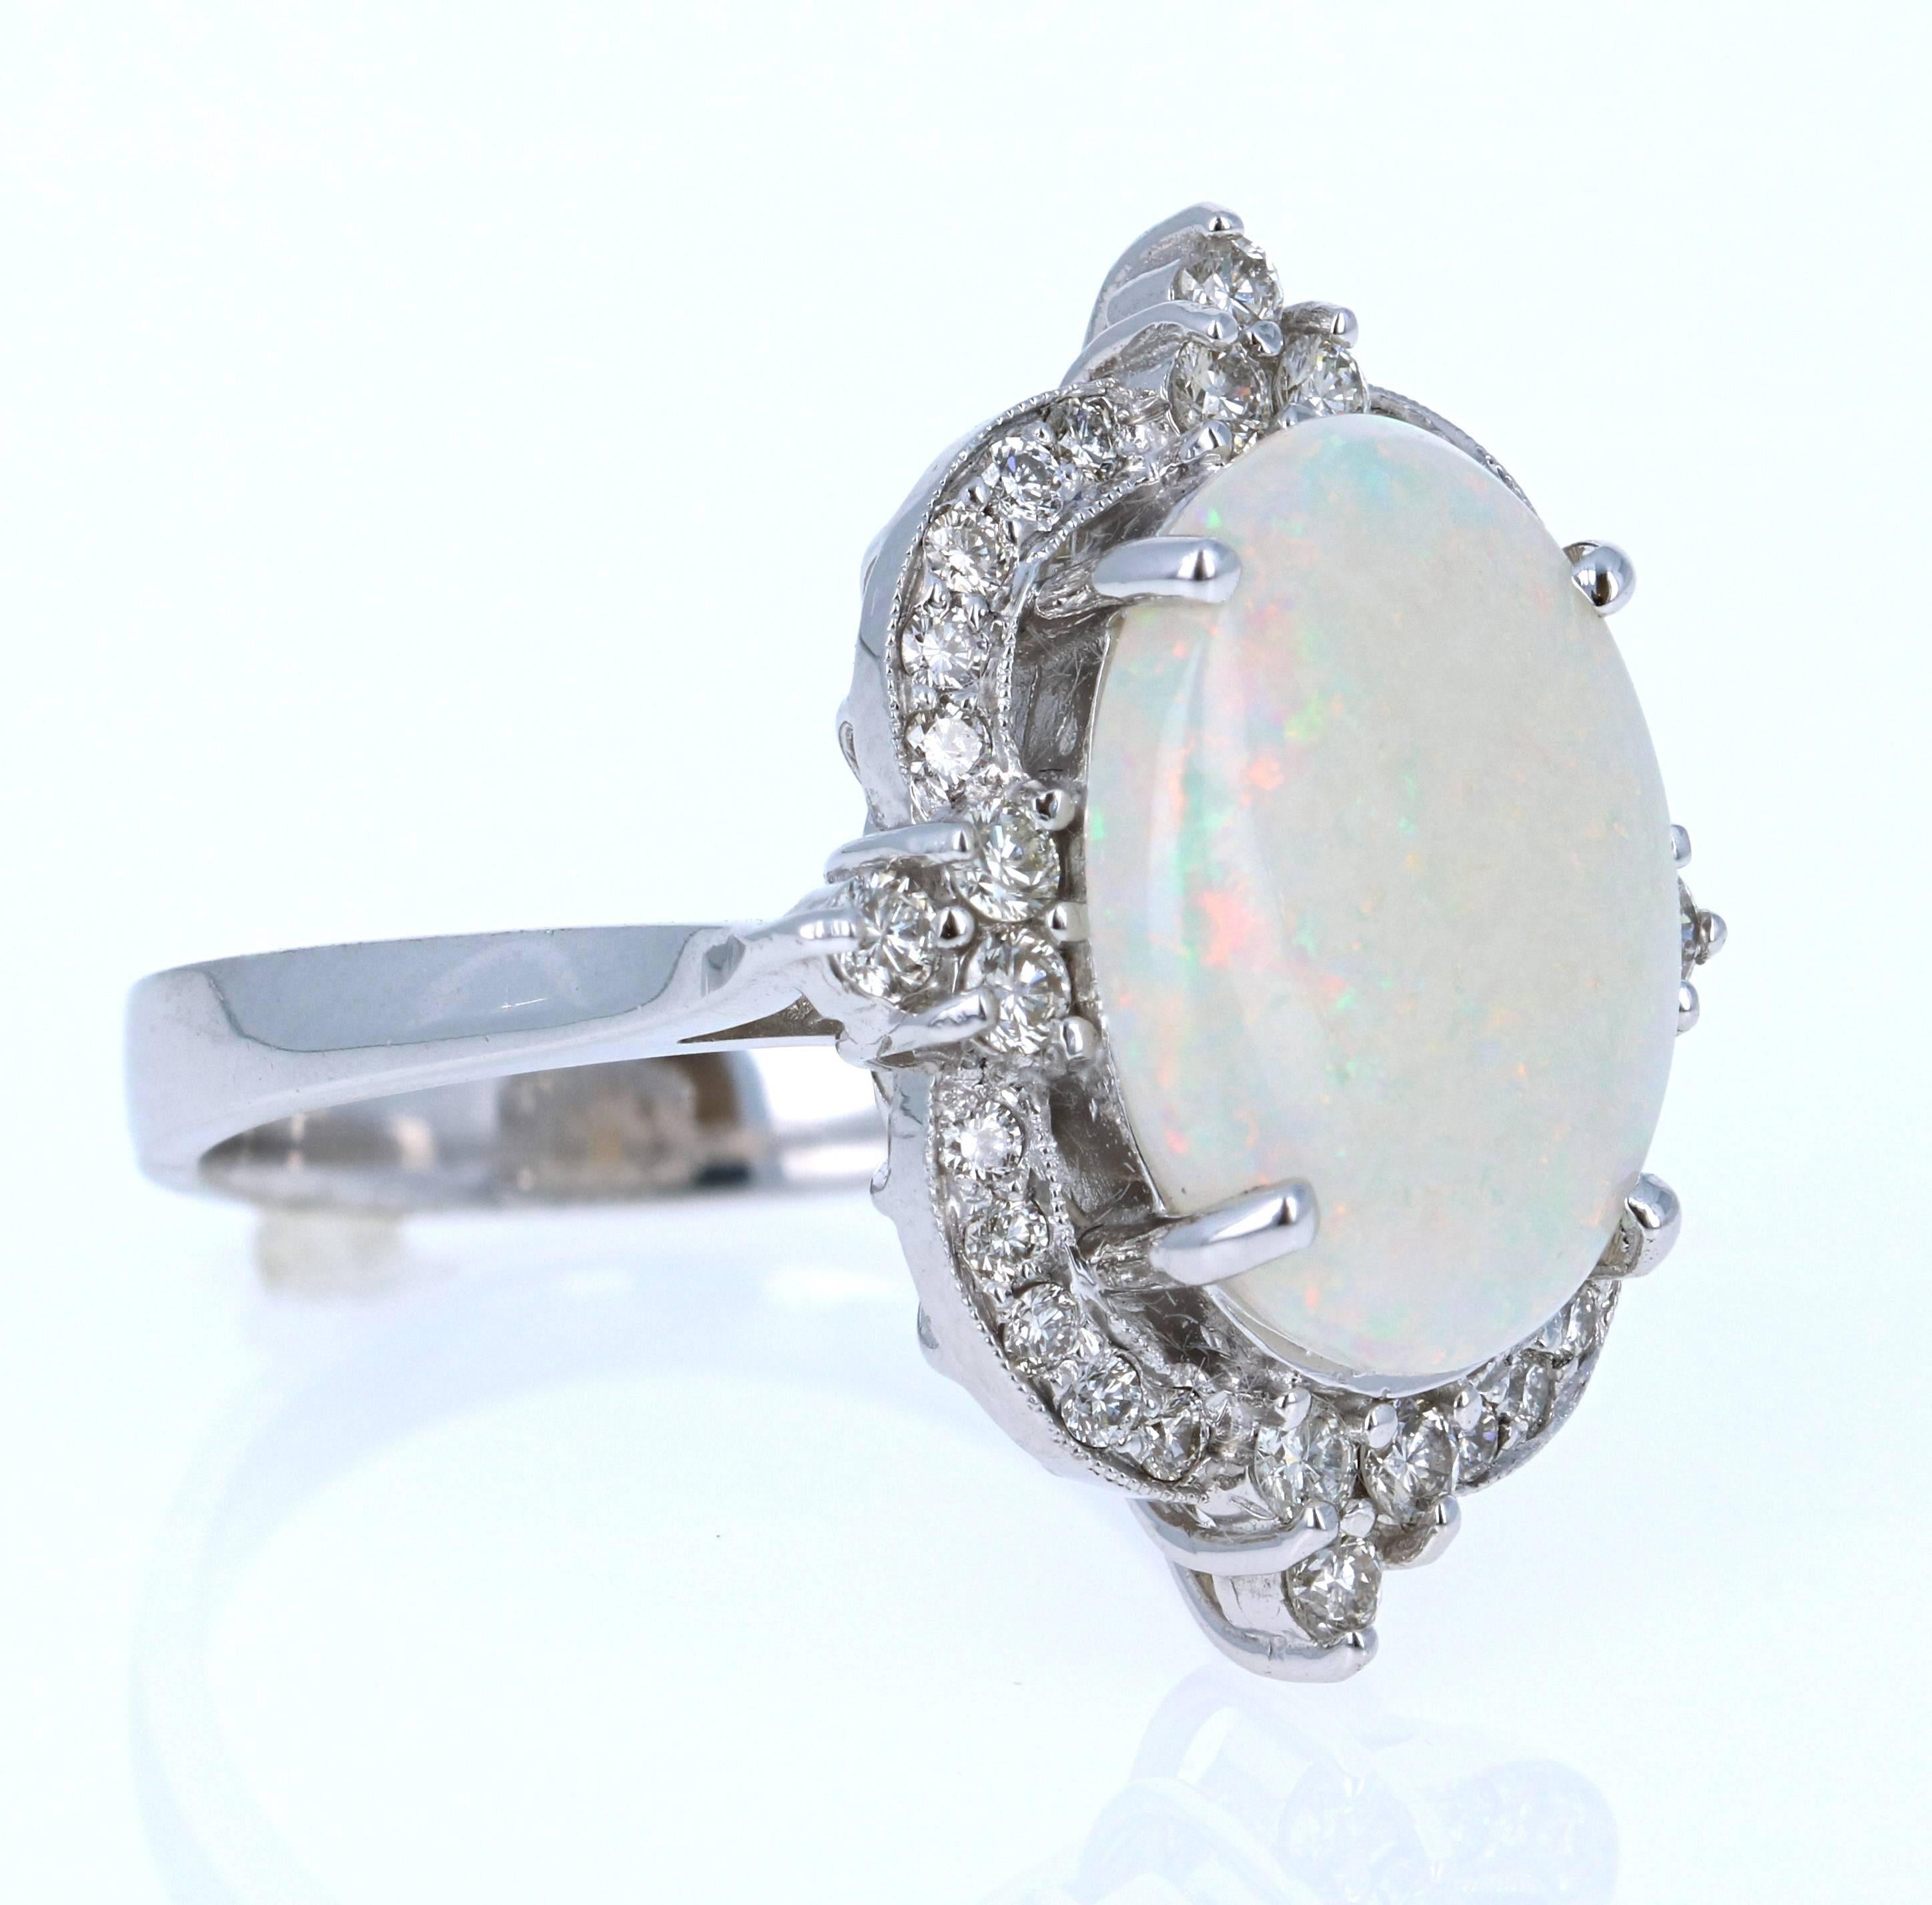 Stunning Opal and Diamond Ring made in a 14K White Gold setting.  The Oval Cut Opal in this Ring weighs 4.02 carats and is surrounded by 32 Round Cut Diamonds that weigh 0.71 carat (Clarity: VS, Color: H).  The total carat weight of this ring is